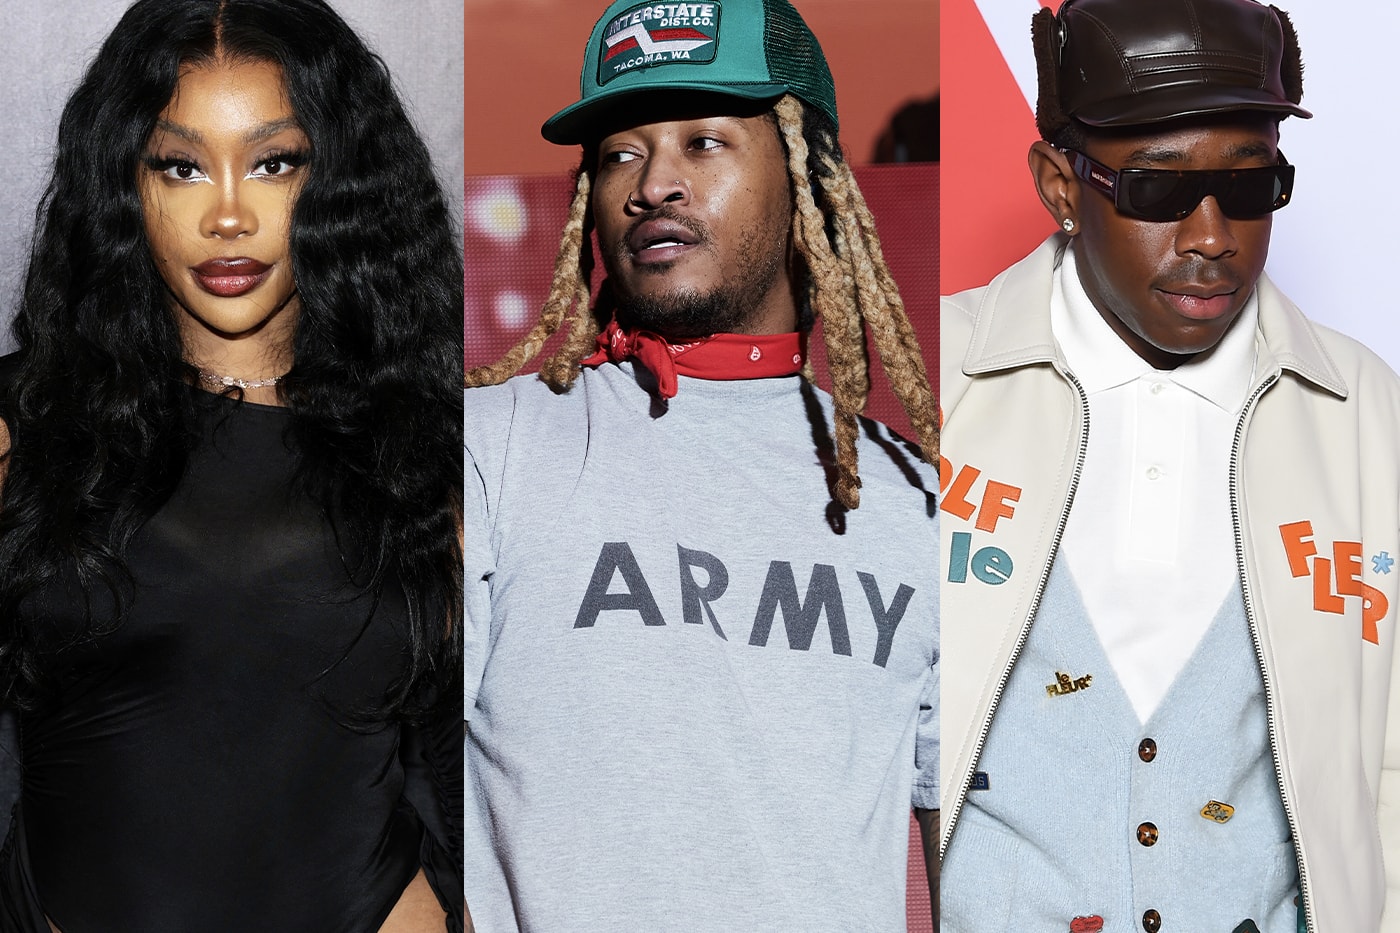 SZA, Future x Metro Boomin and Tyler, The Creator Lead Lollapalooza's 2024 Lineup teezo touchdown kesha list performance concerts festival price tickets Hozier, Stray Kids, Melanie Martinez and Skrillex.  Elsewhere, Deftones, Faye Webster, Teezo Touchdown, Vince Staples, Killer Mike, Zedd, Dominic Fike, Labrinth, Kevin Abstract, Ethel Cain, Two Door Cinema Club, SiR, Eyedress and Veeze are slated to perform.   A common theme this festival season: female rap and R&B artists are showing up in numbers. Sexyy Red, Victoria Monét, Kaliii and FLO will all take the stage over the course of the four-day festival